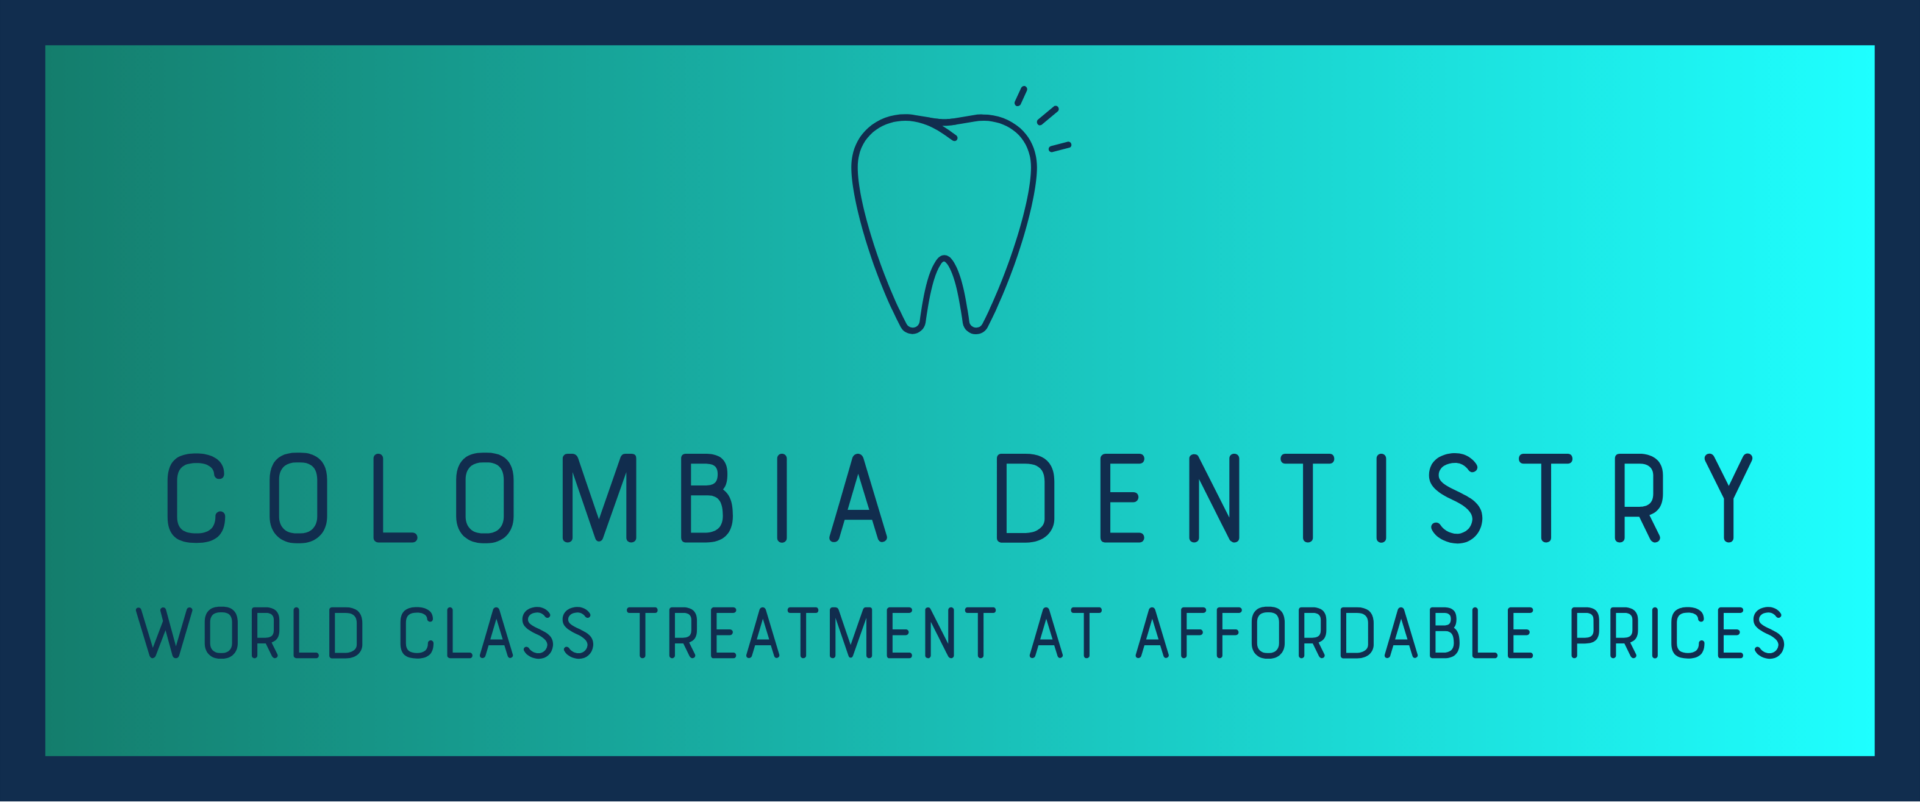 colombia dentistry logo